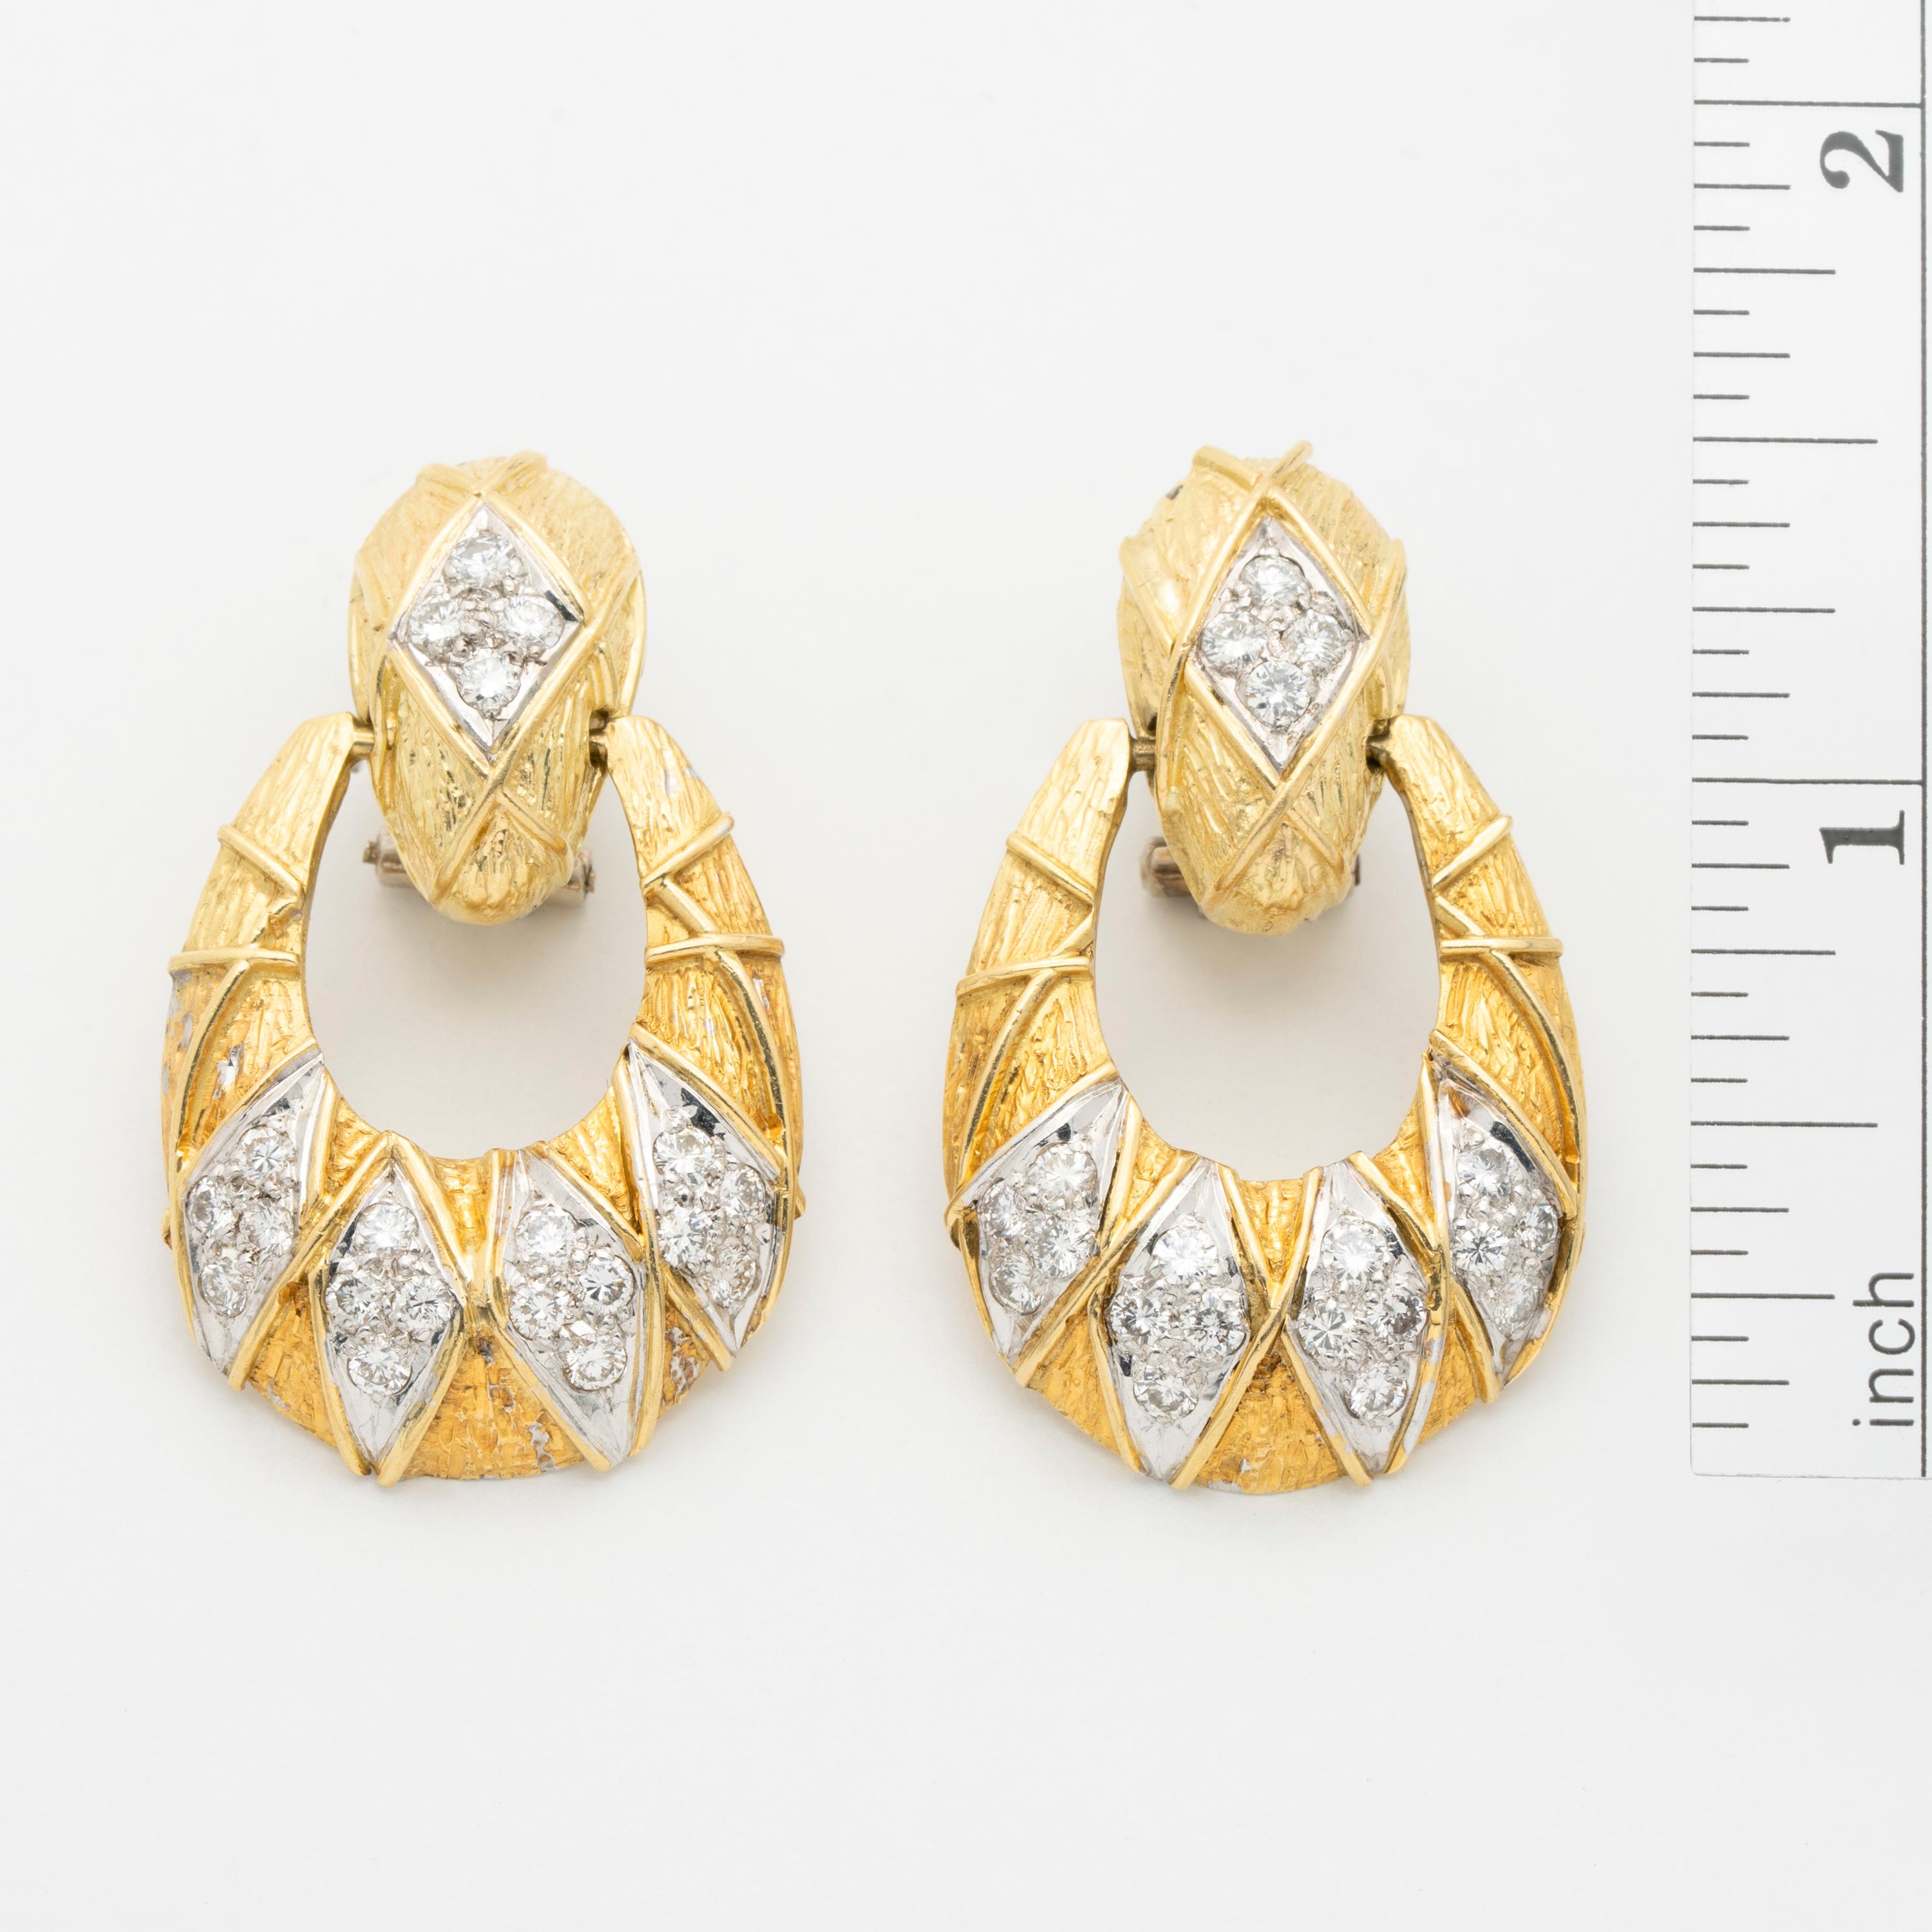 Period: Vintage
Year: c.1980
Material: 18K Yellow Gold, 2.0ct Diamond
Weight: Each earring weighs 11.5 grams
Length of each earing from post is 1.5 inches/3.81 cm Width: 1 inch/2.54 cm
Condition: Pristine Vintage
Made in the U.S.A

Crafted in the